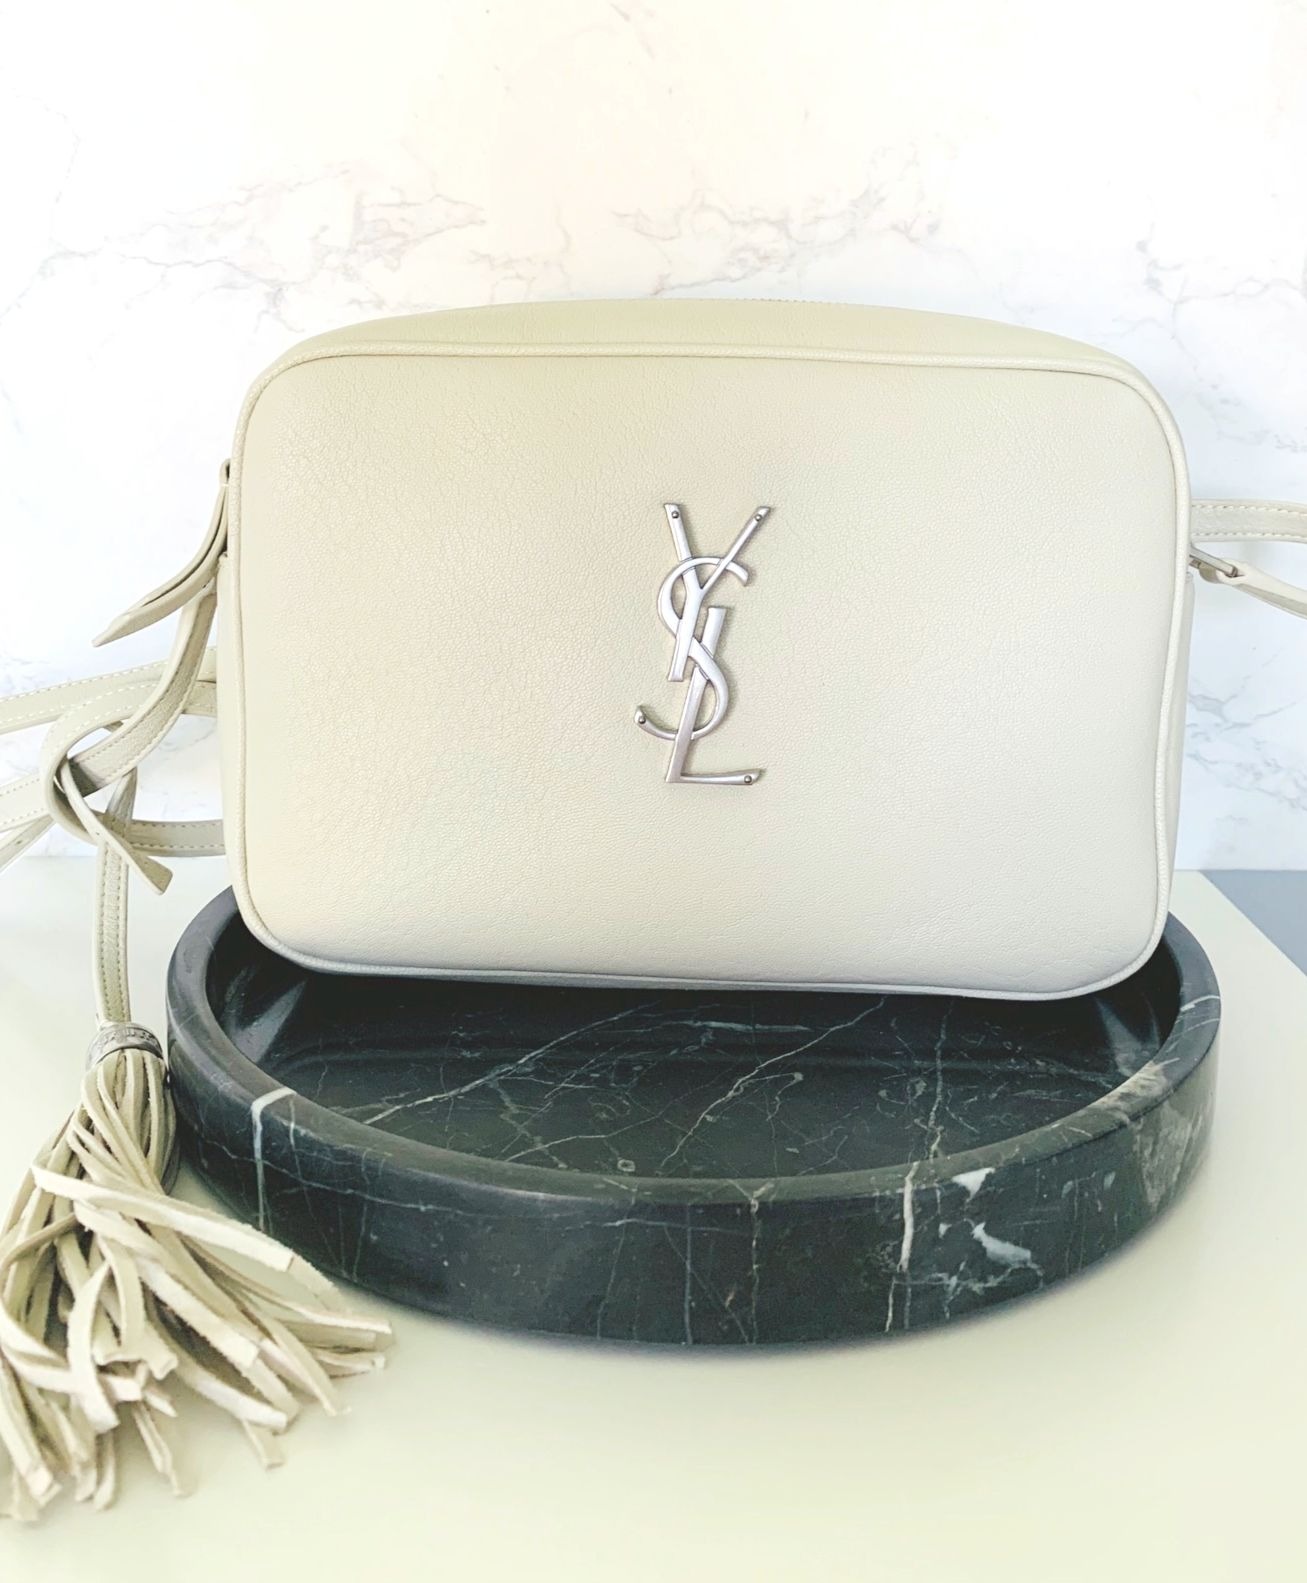 YSL UPTOWN POUCH REVIEW: what fits inside + different ways to wear